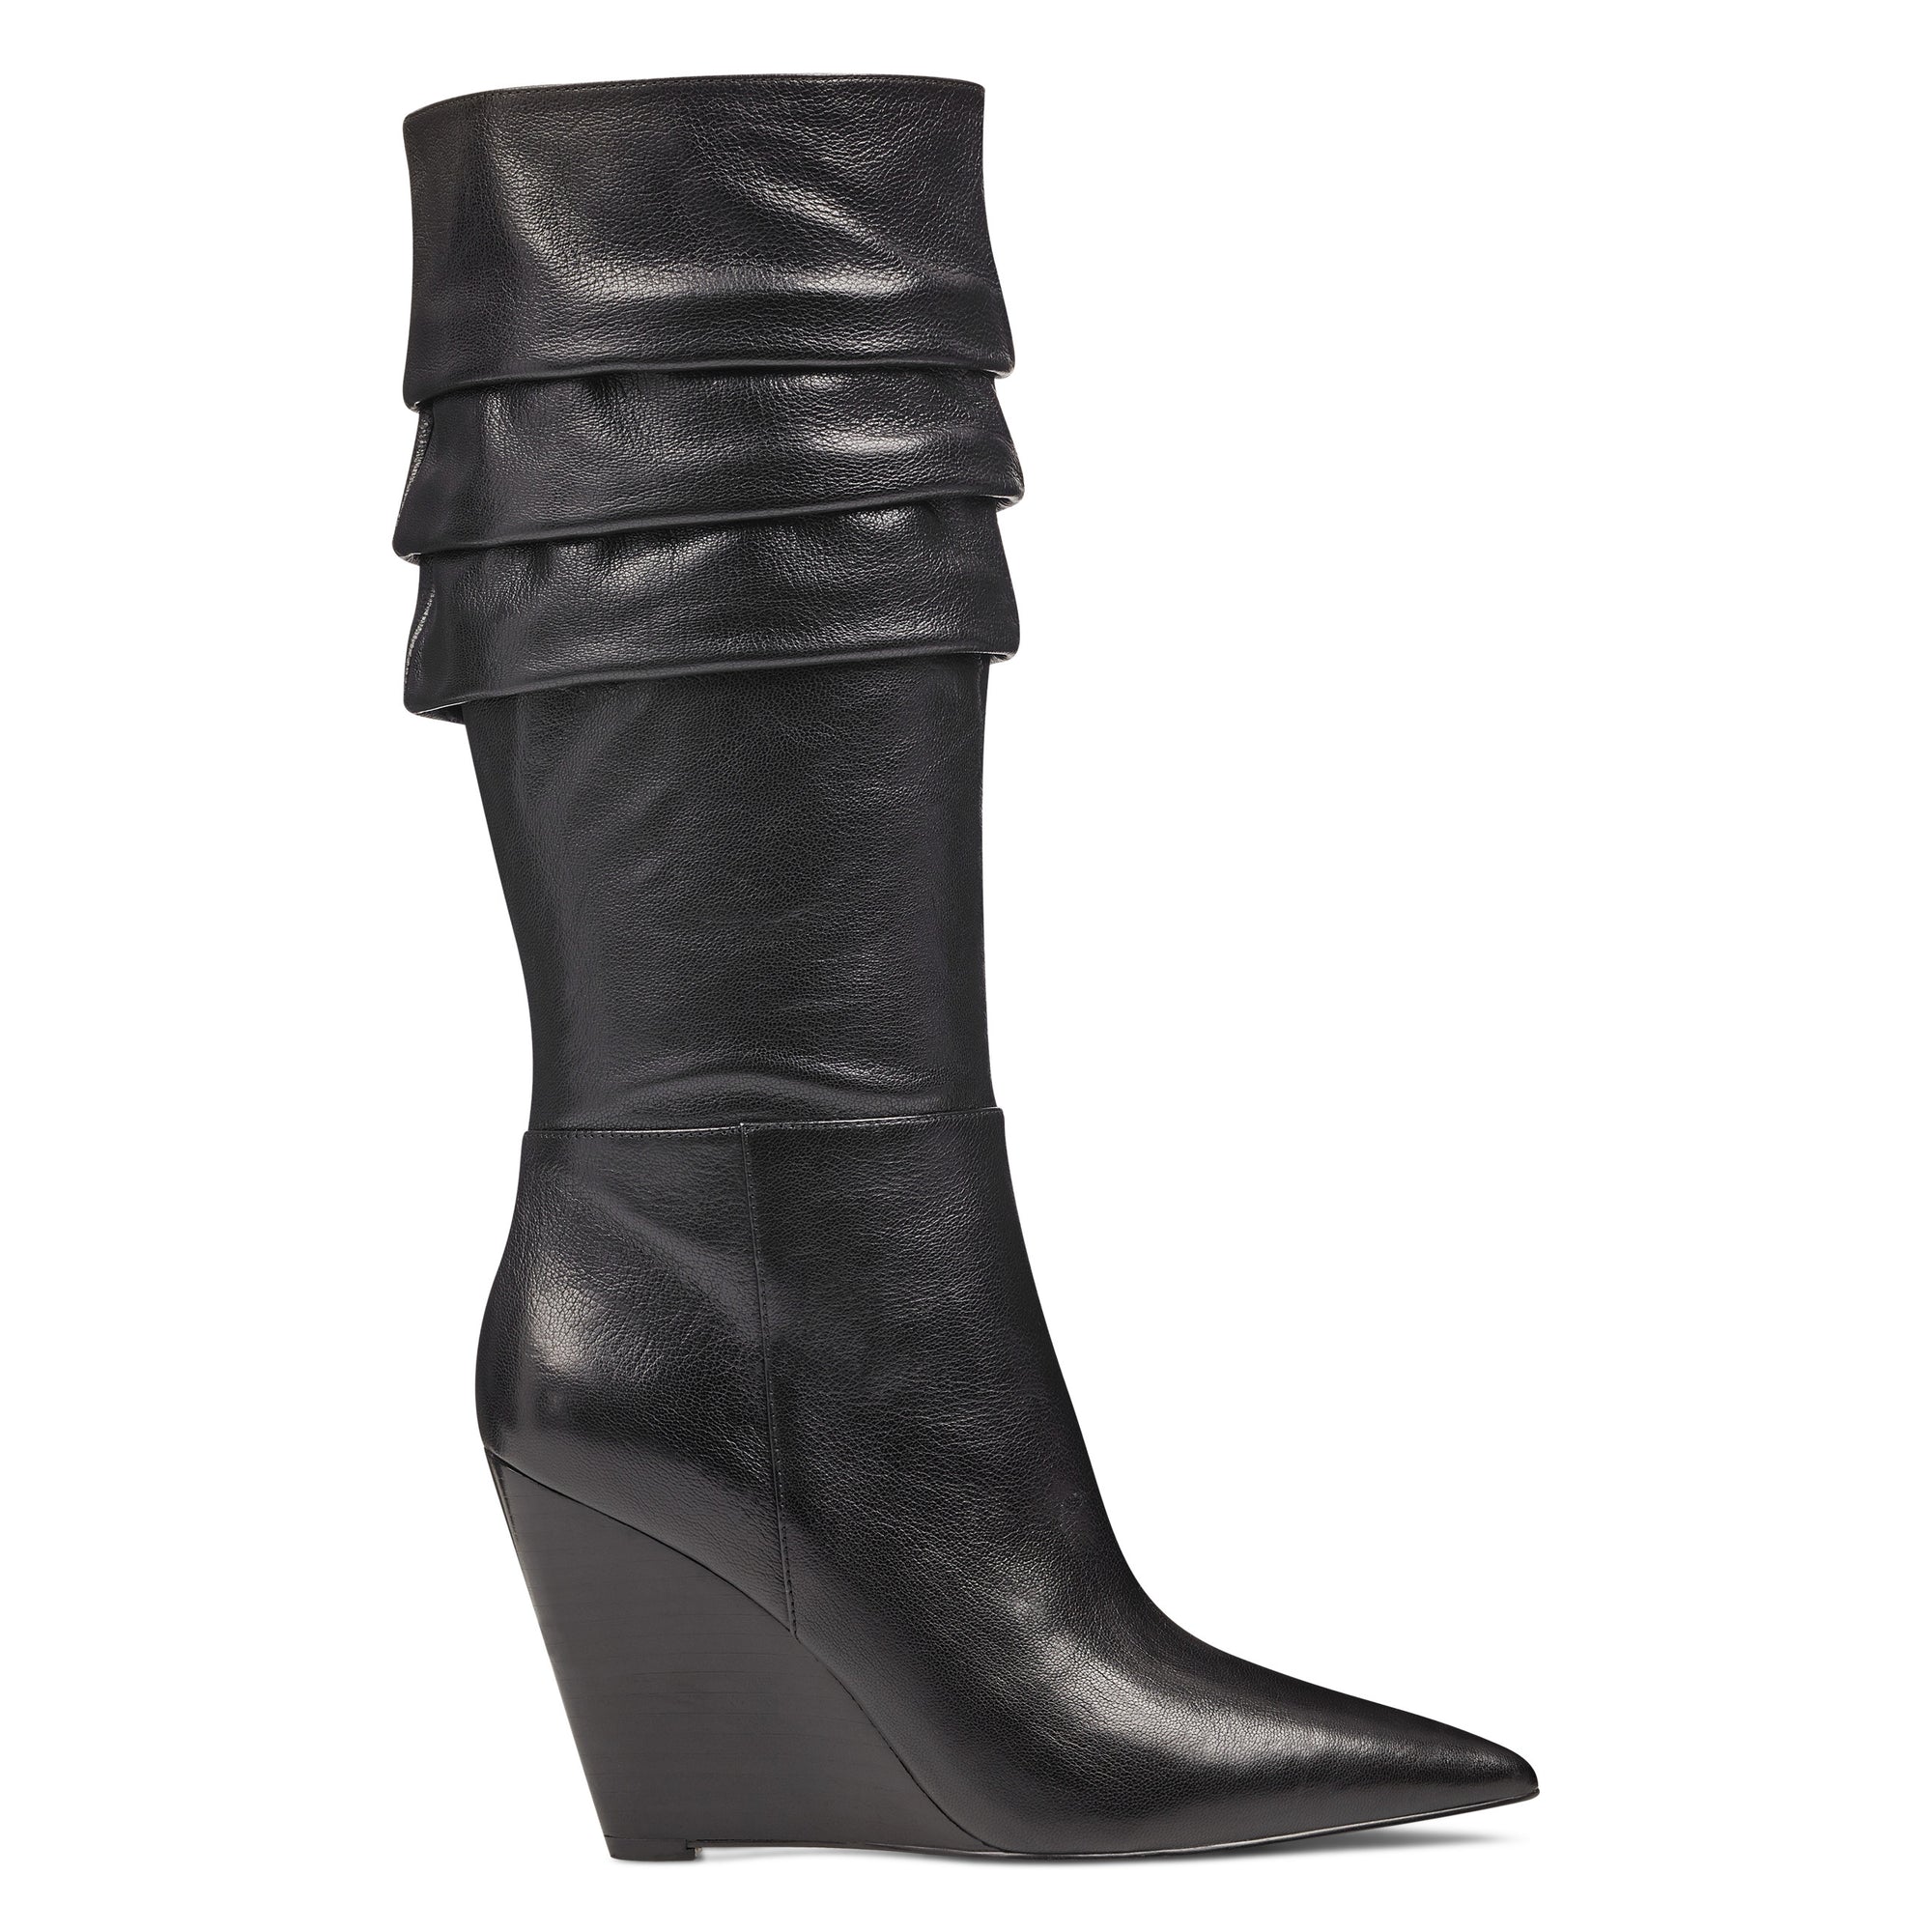 Vernese Scrunched Wedge Boots - Nine West